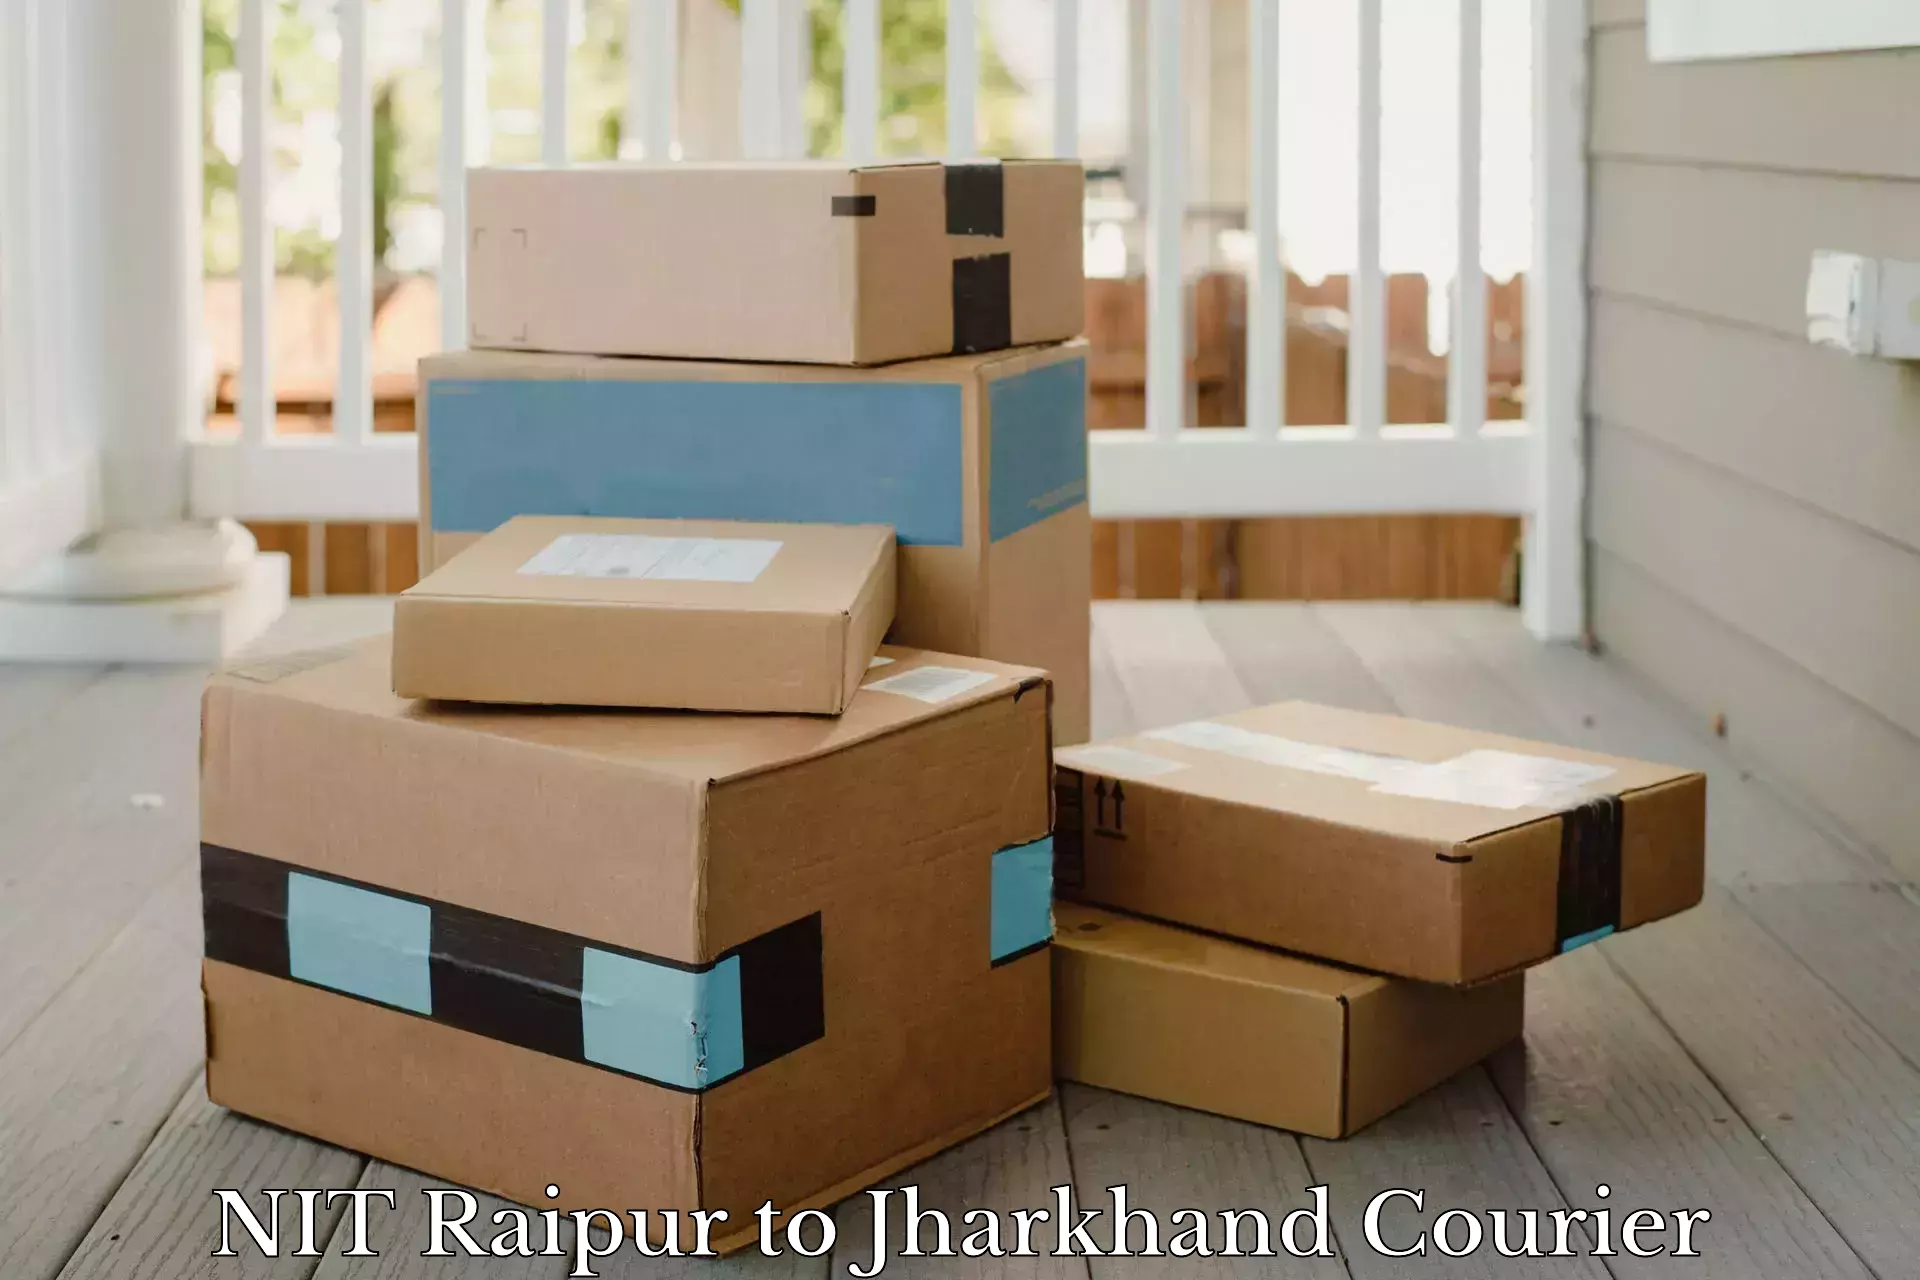 Supply chain delivery in NIT Raipur to Dhanbad